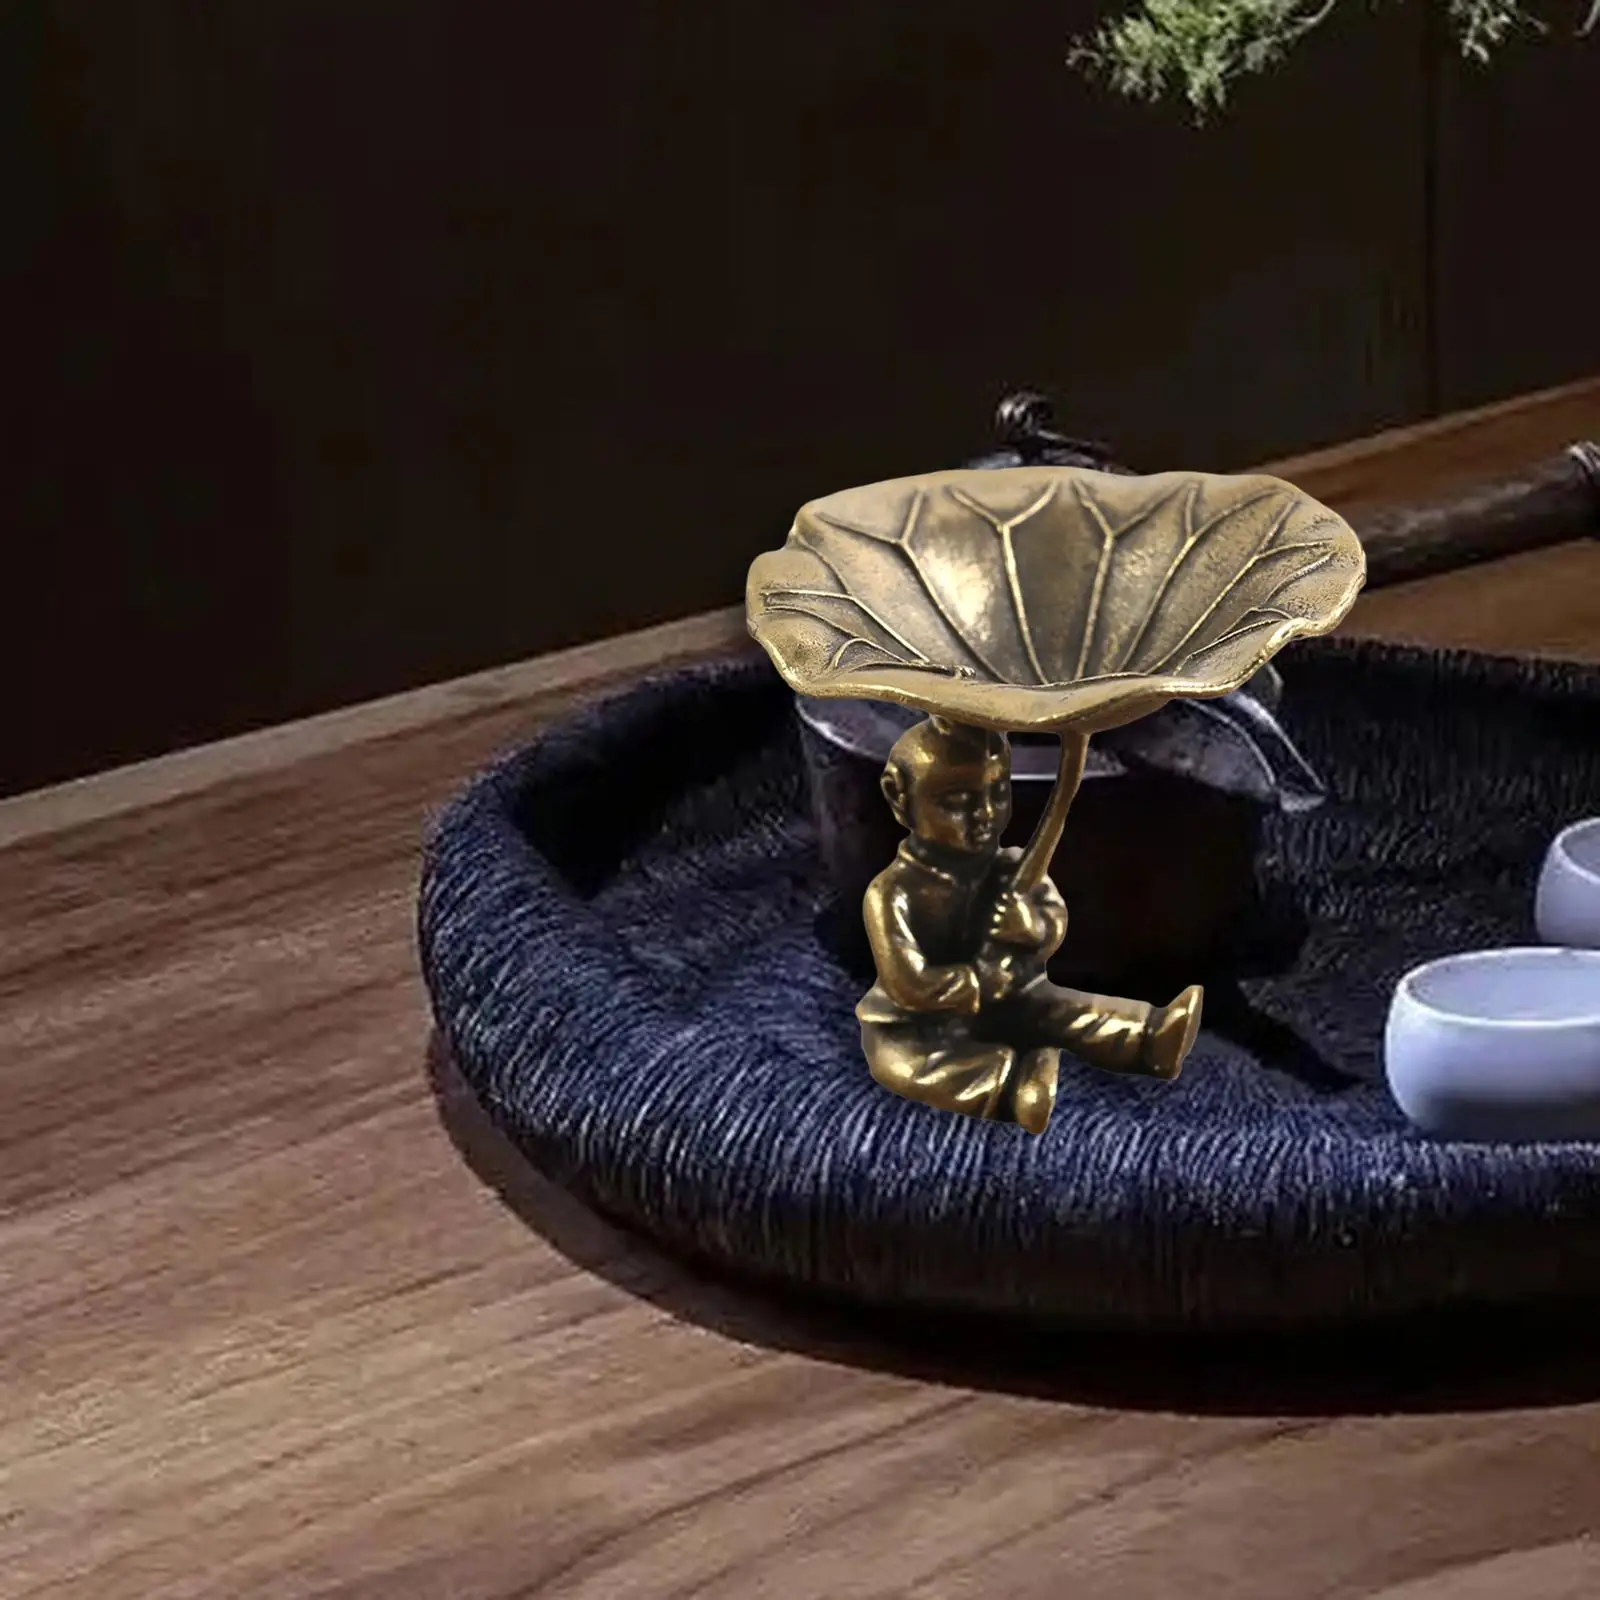 Incense Holder Incense Stoves Brass Portable Incense Censer Incense Cone Holders for Yoga Studio Office Teahouse Relaxation